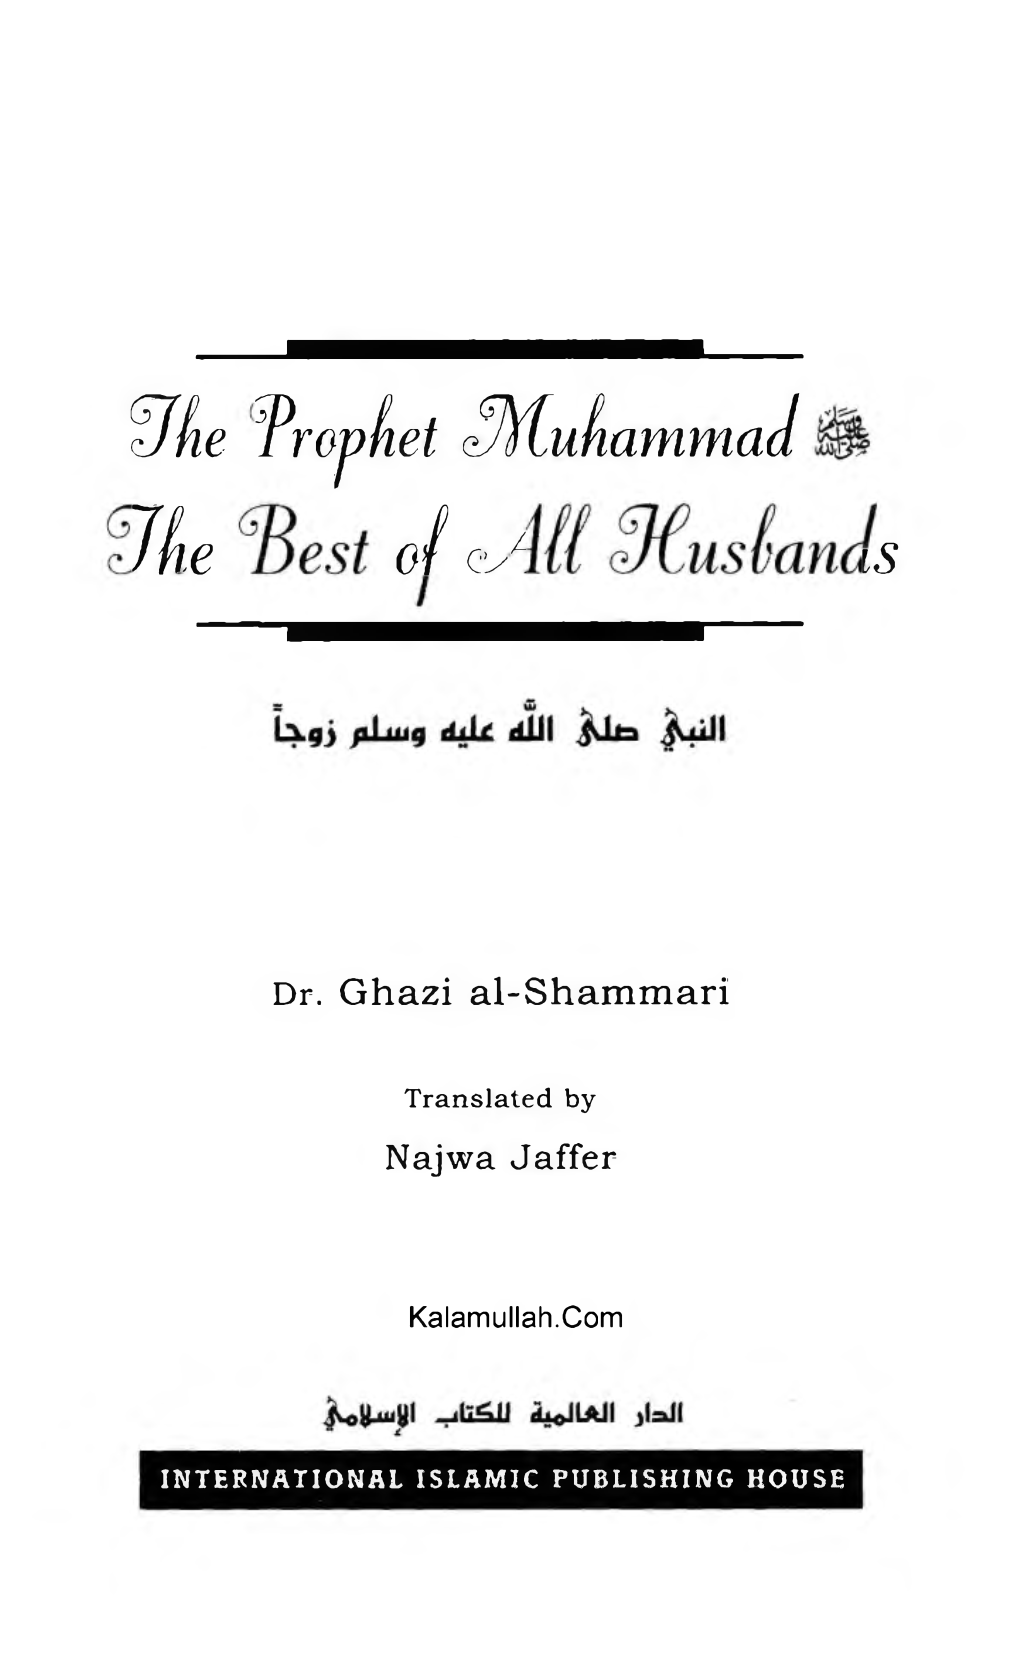 The Best of All Husbands